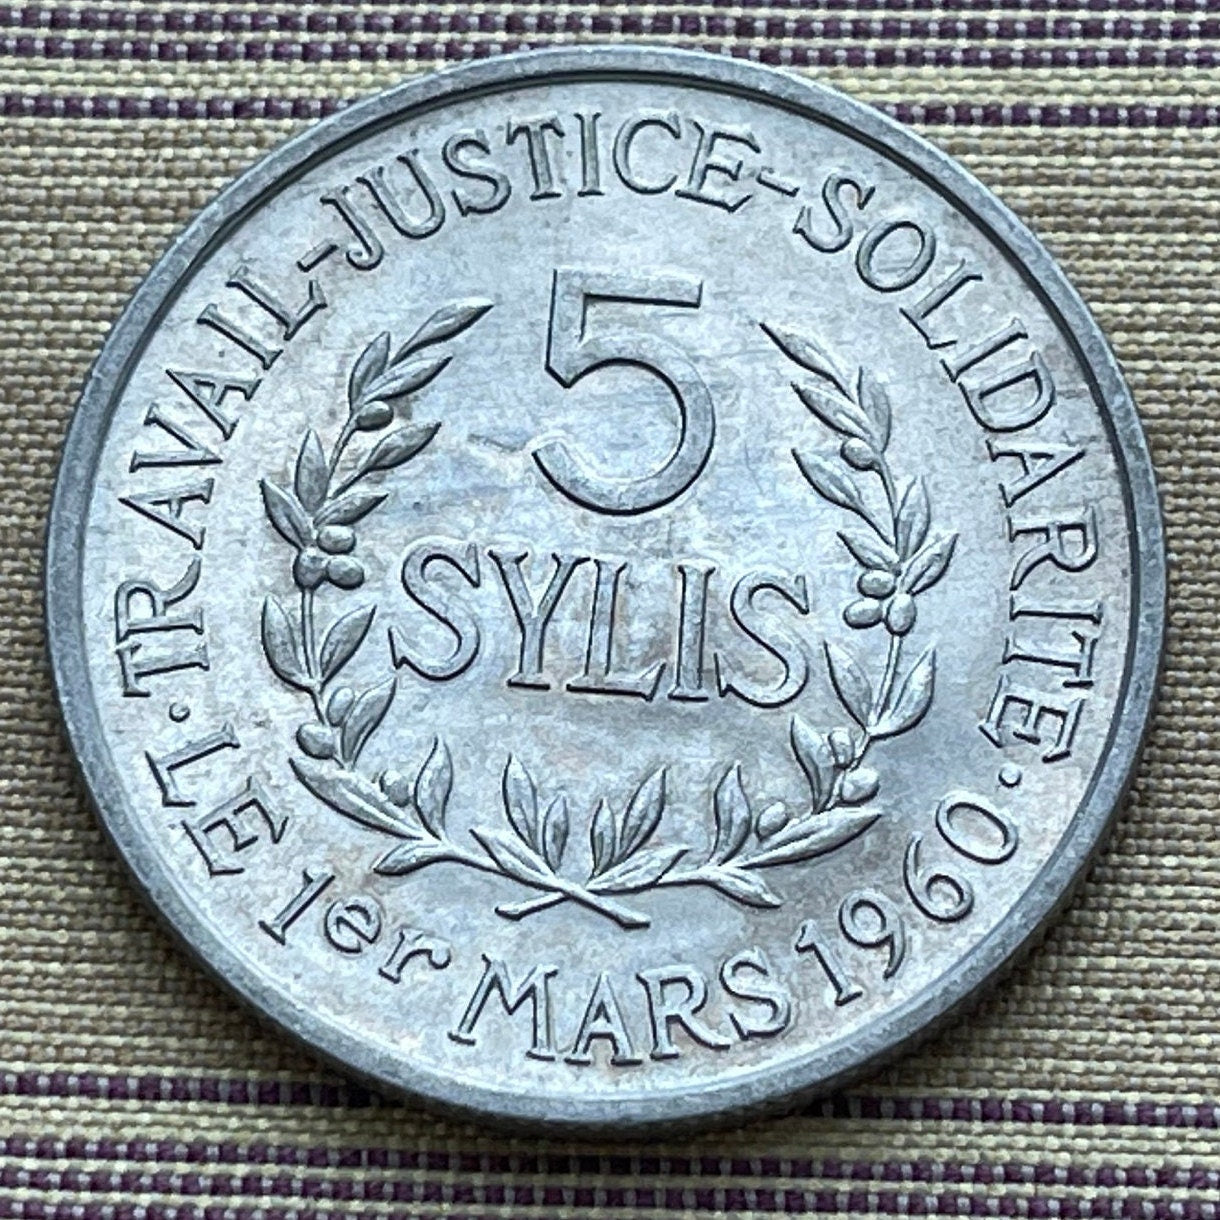 Almamy Samori Touré 5 Sylis Guinea Authentic Coin Money for Jewelry (Black Lives Matter) (Freedom Fighter) (1971) (Work Justice Solidarity)